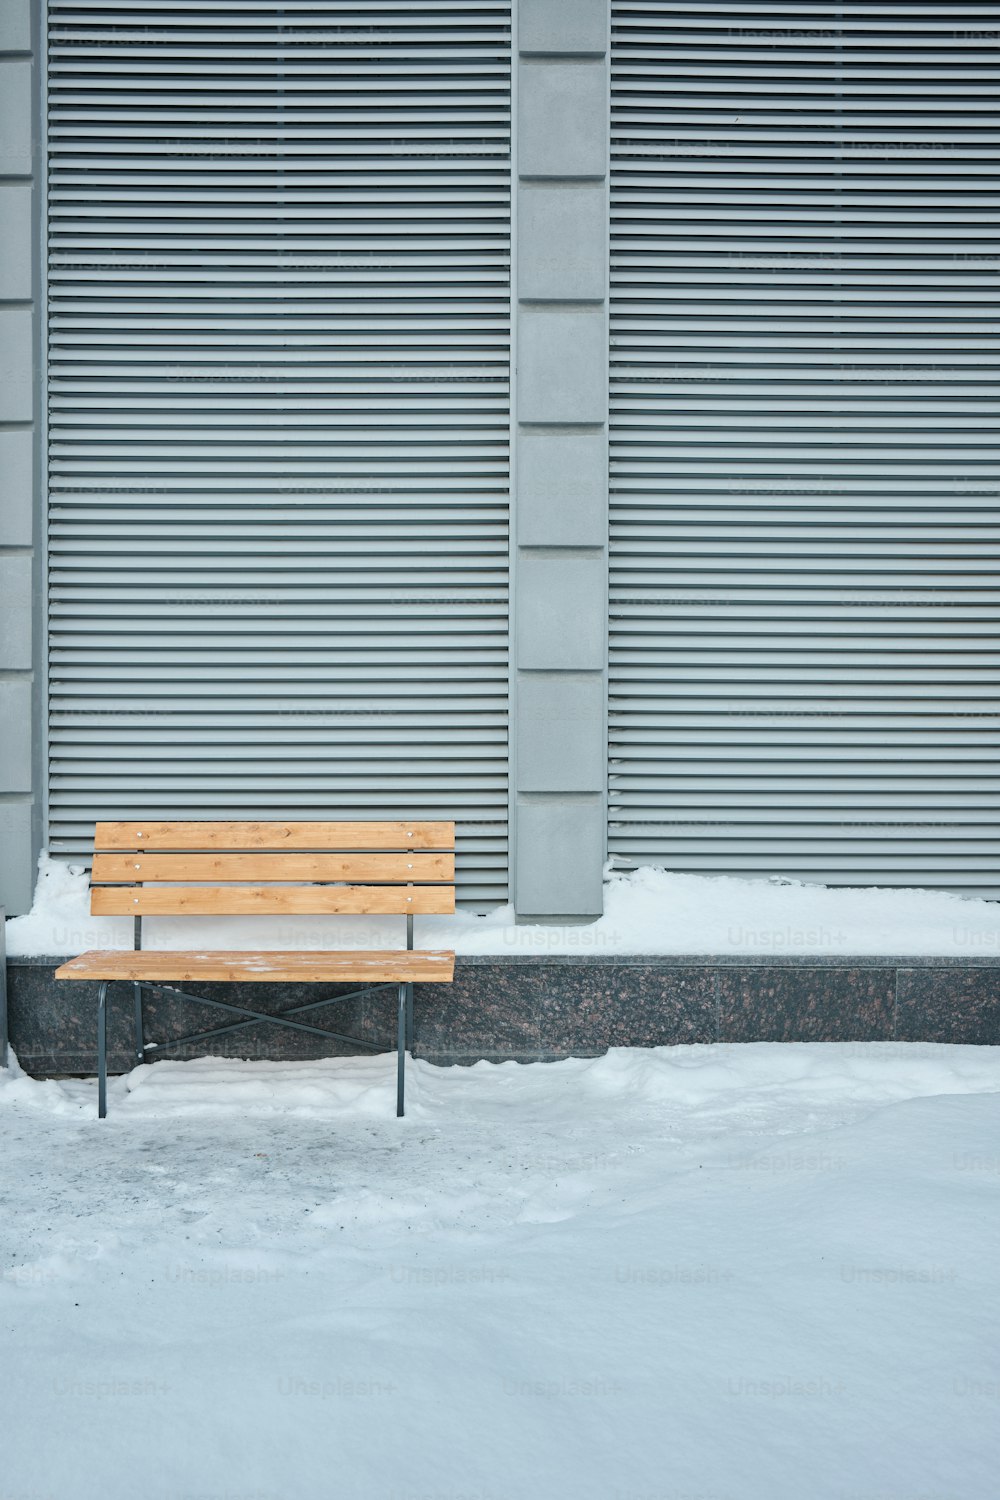 a wooden bench sitting in front of a building